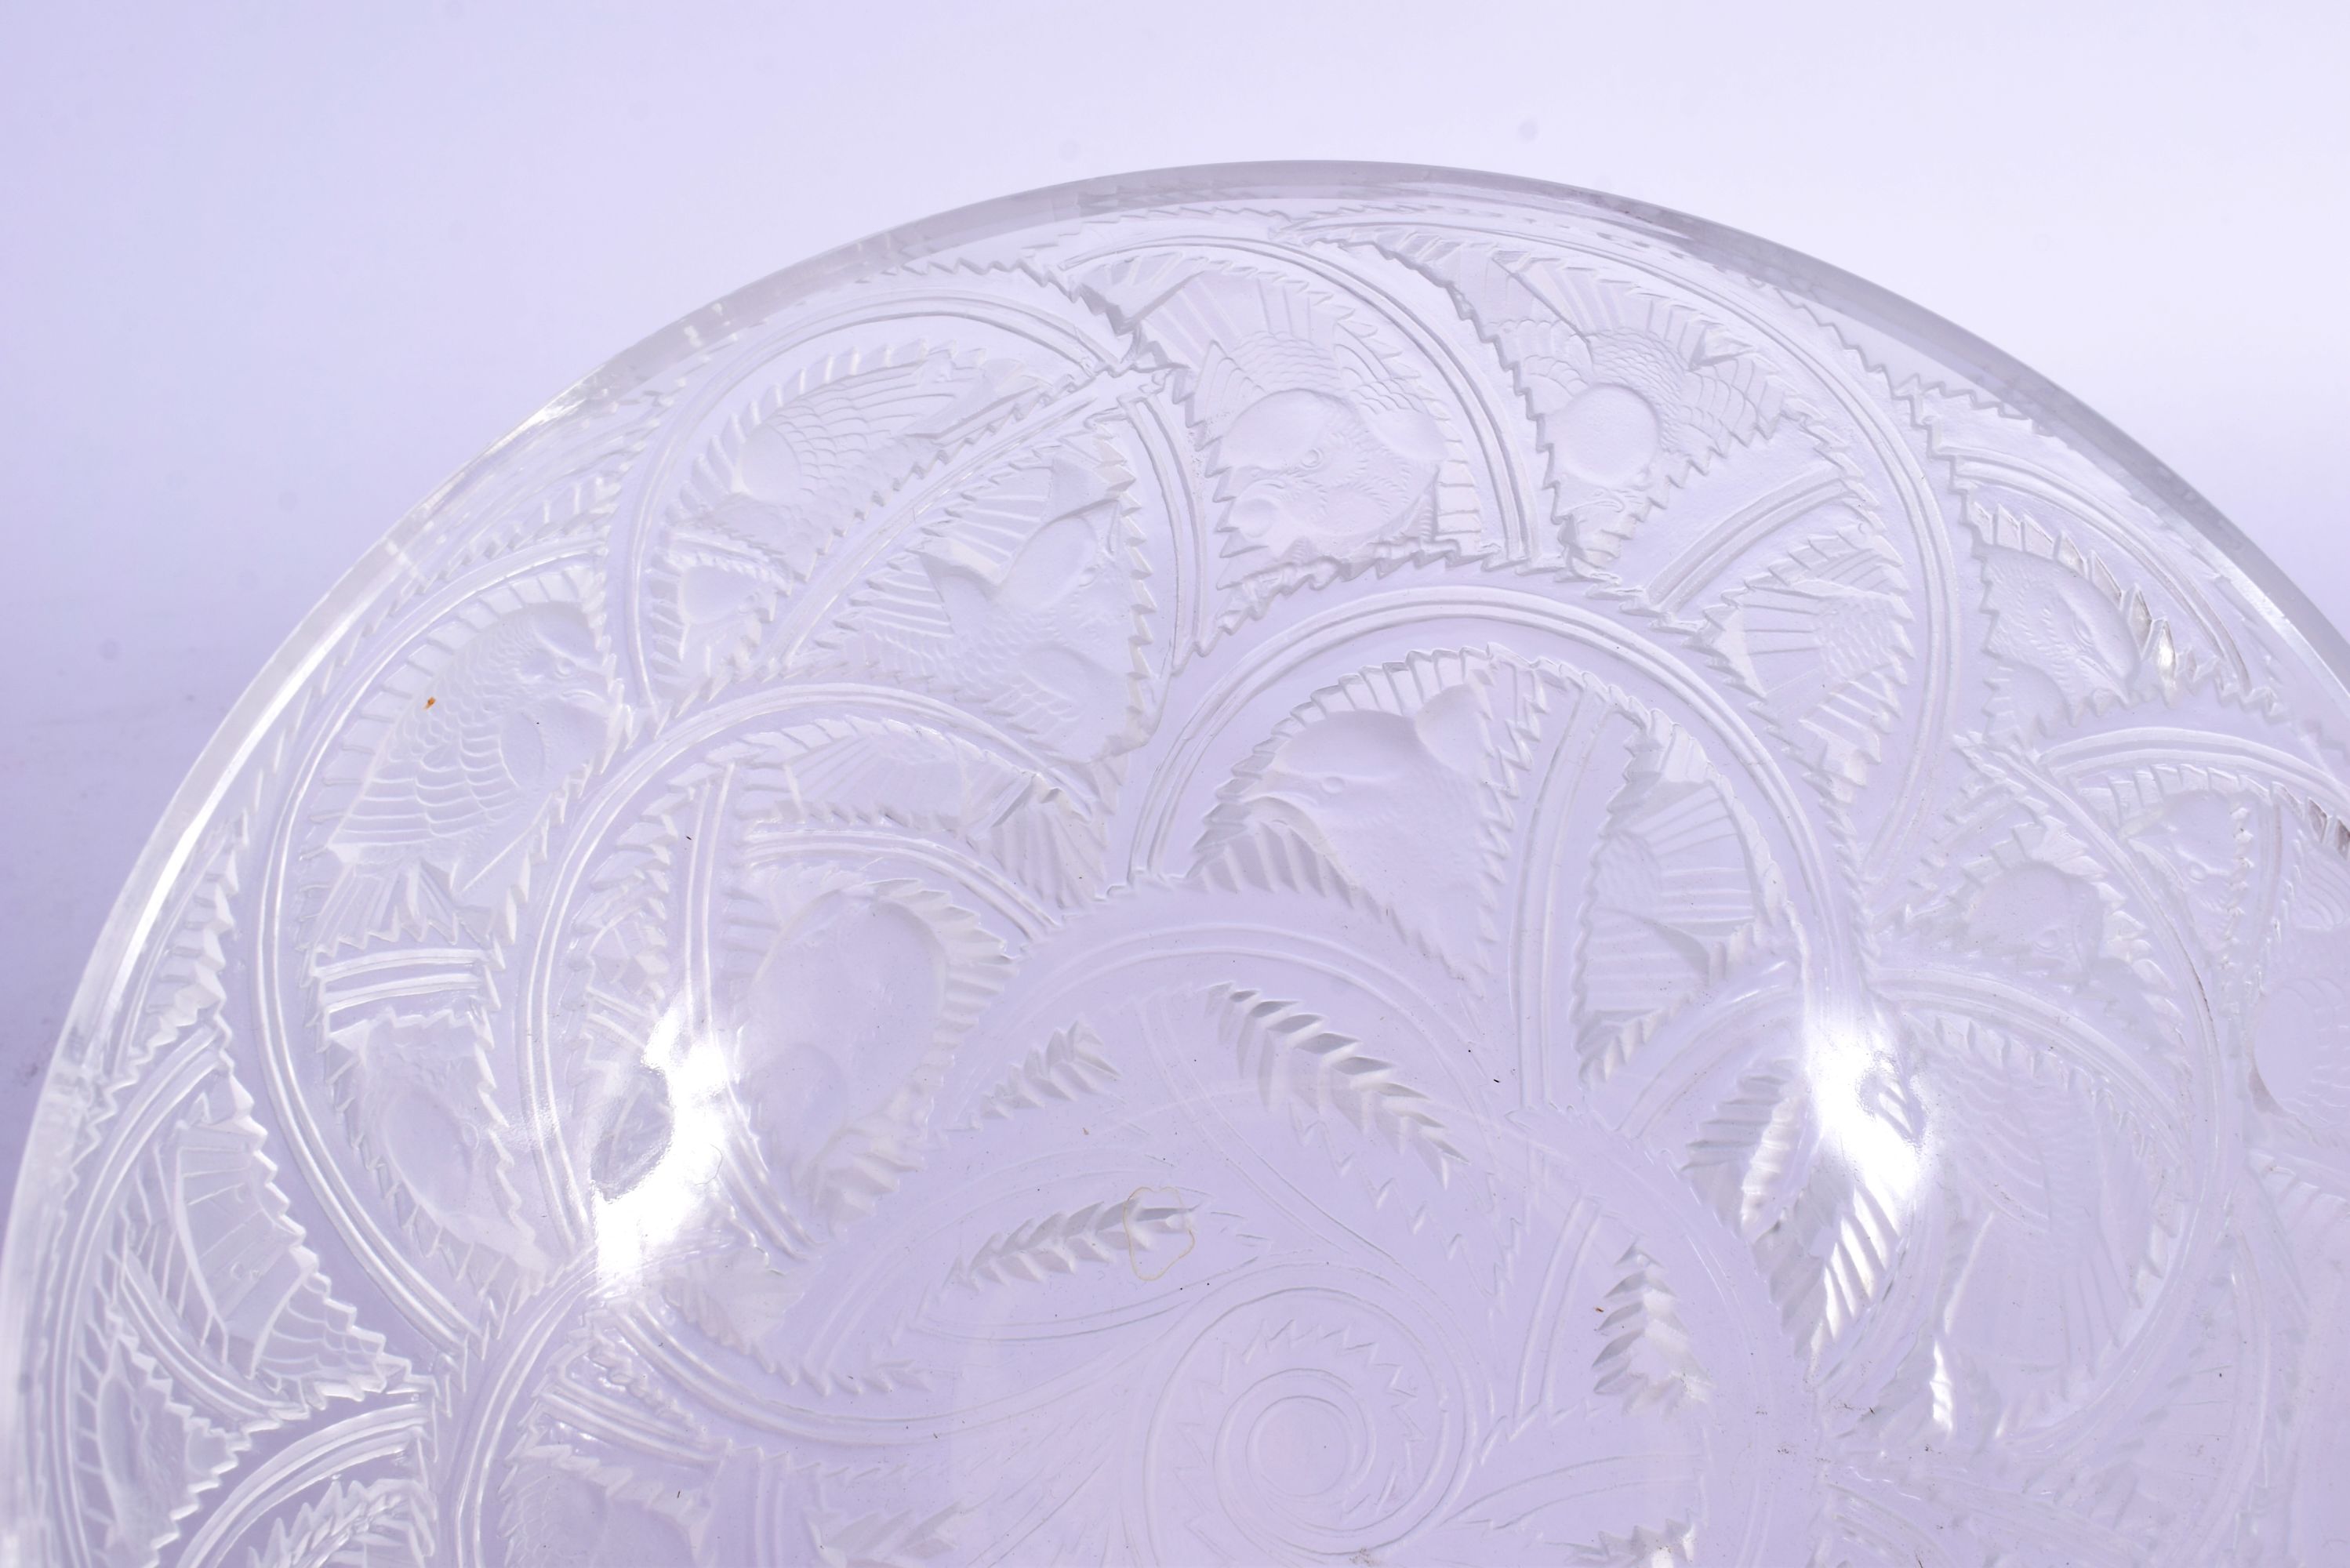 A LARGE FRENCH LALIQUE GLASS VASE decorated with birds and foliage. 22 cm x 10 cm. - Image 2 of 6